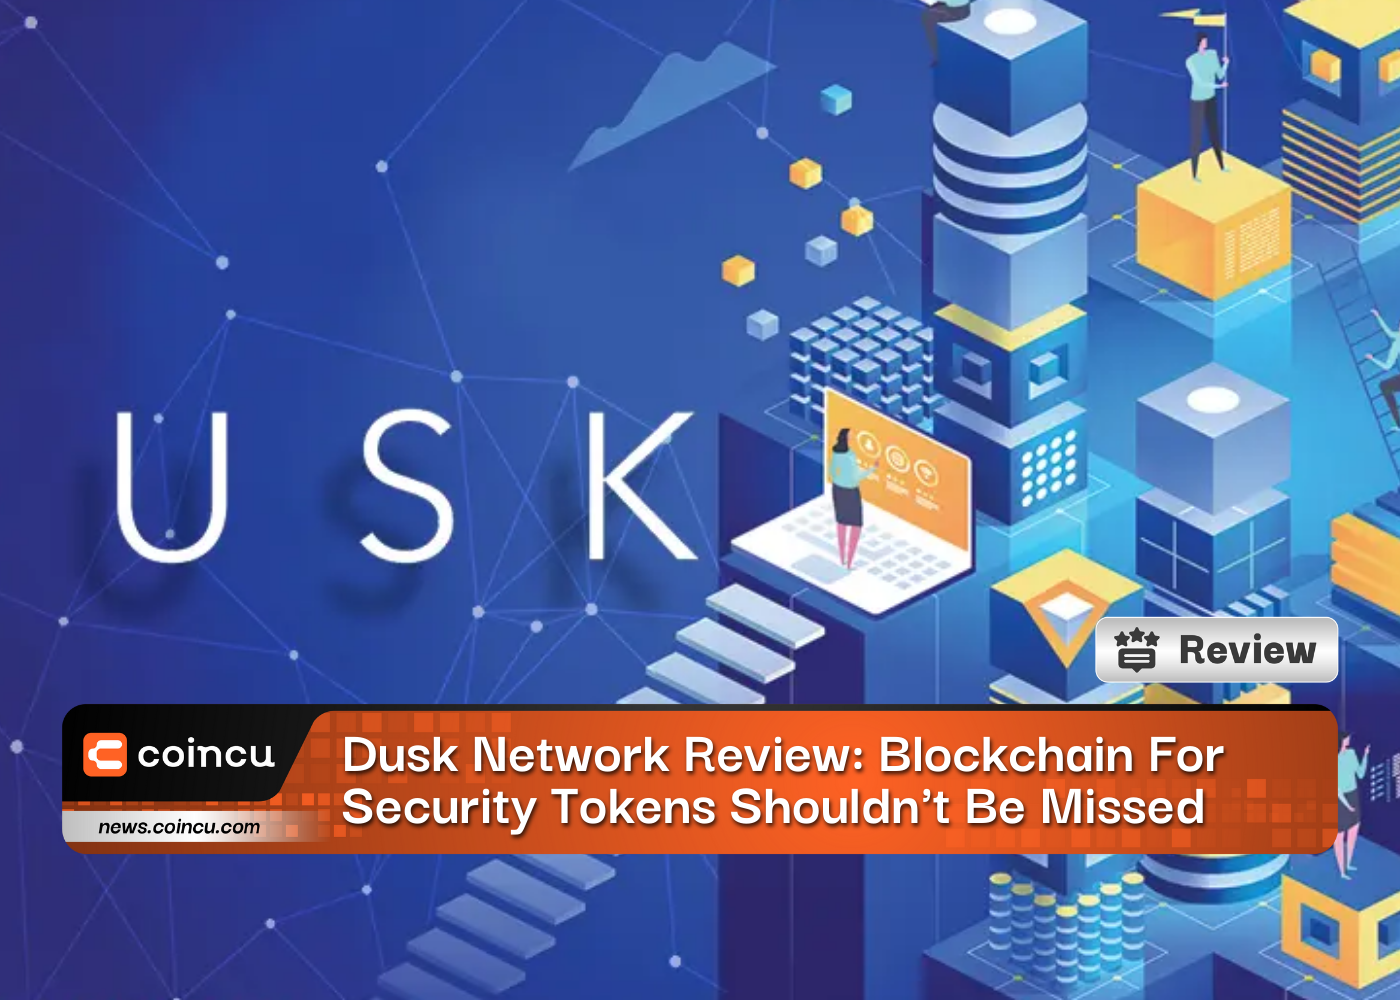 Dusk Network Review: Blockchain for Security Tokens Shouldn't Be Missed